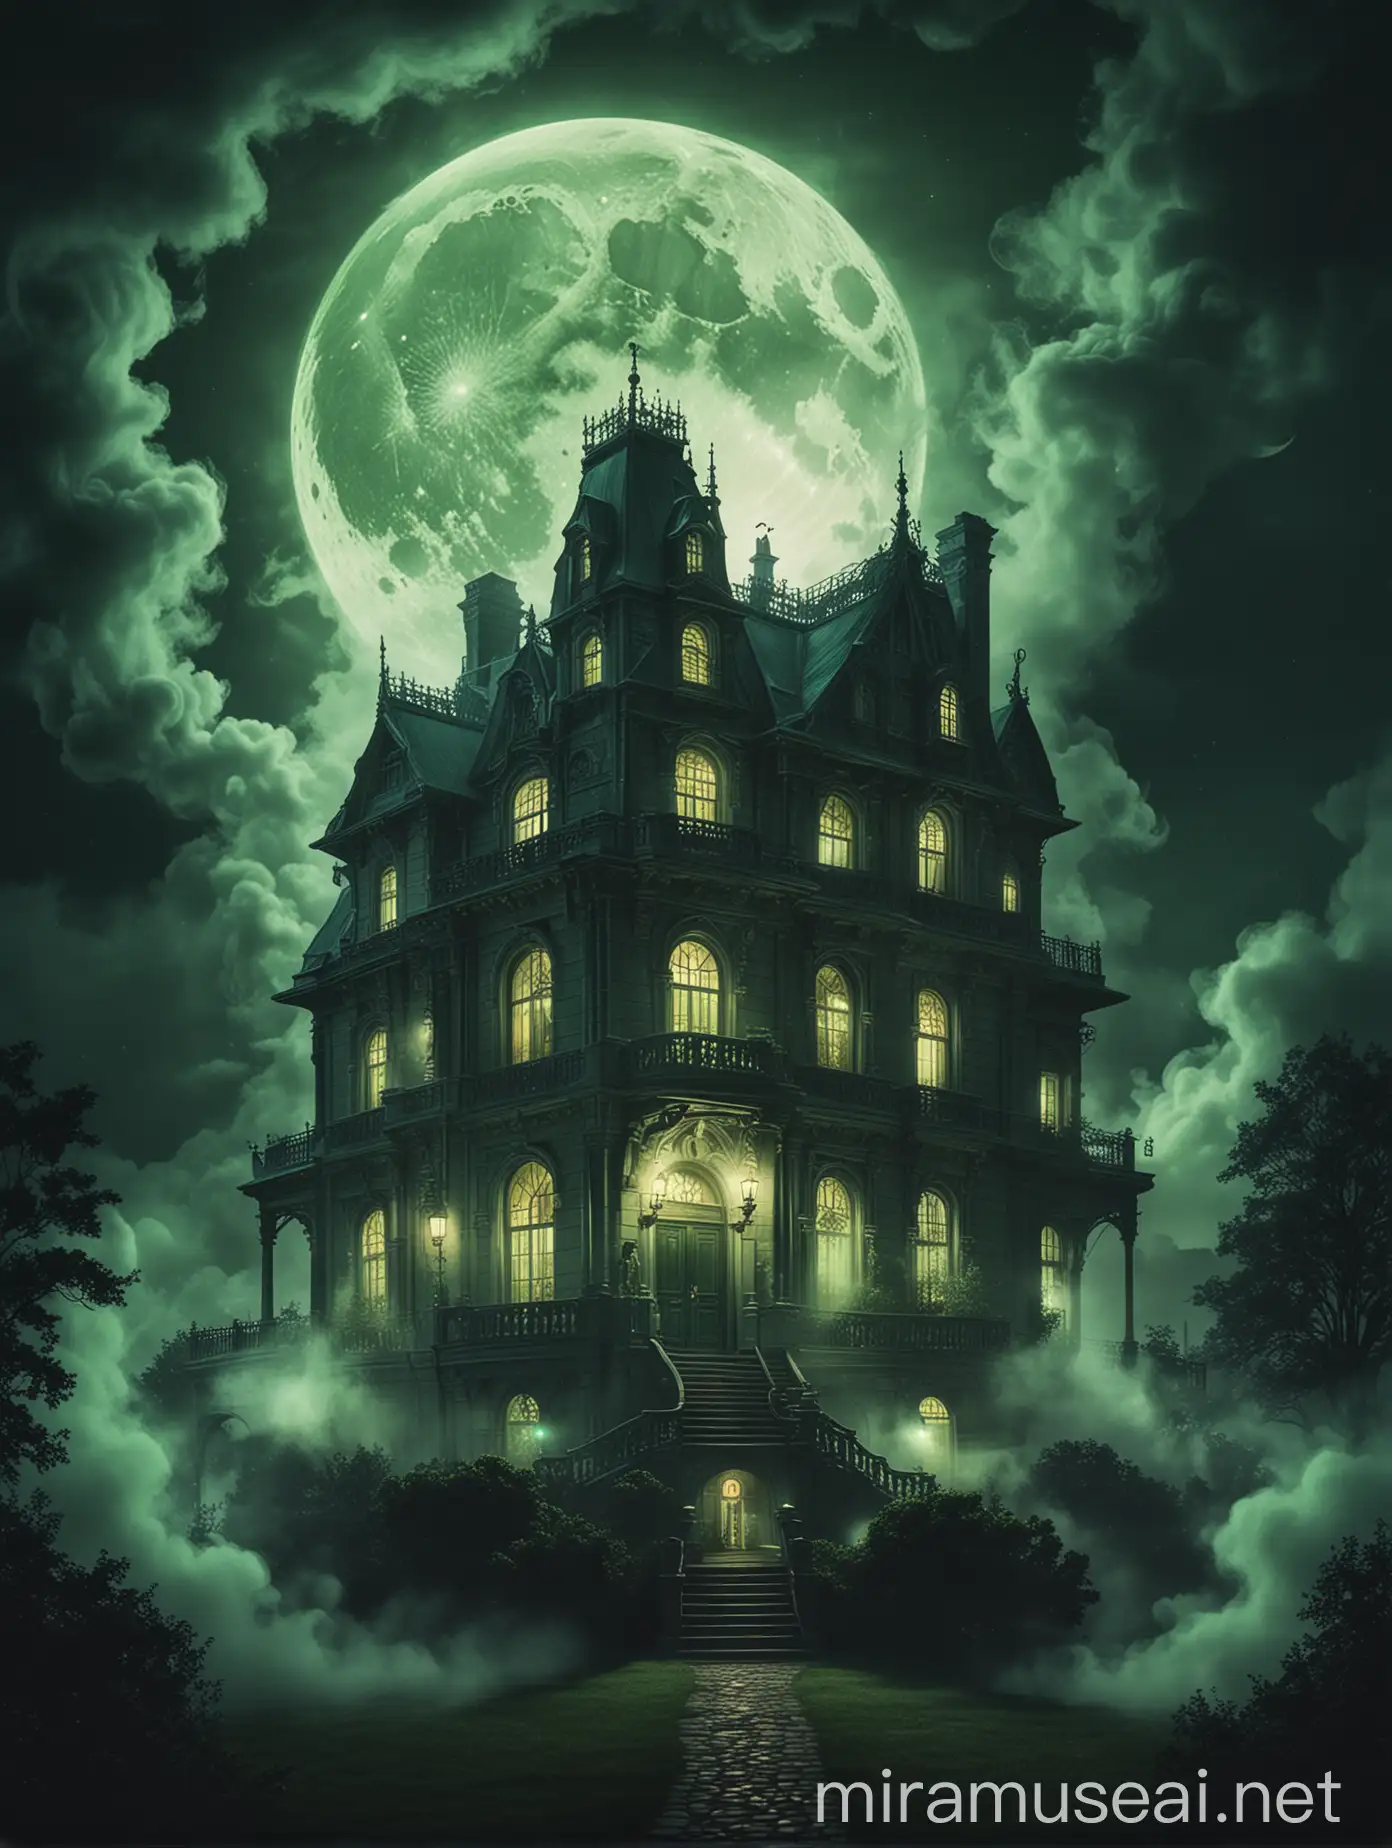 Eerie Mansion Night Scene with Green Smoke and Glowing Moon